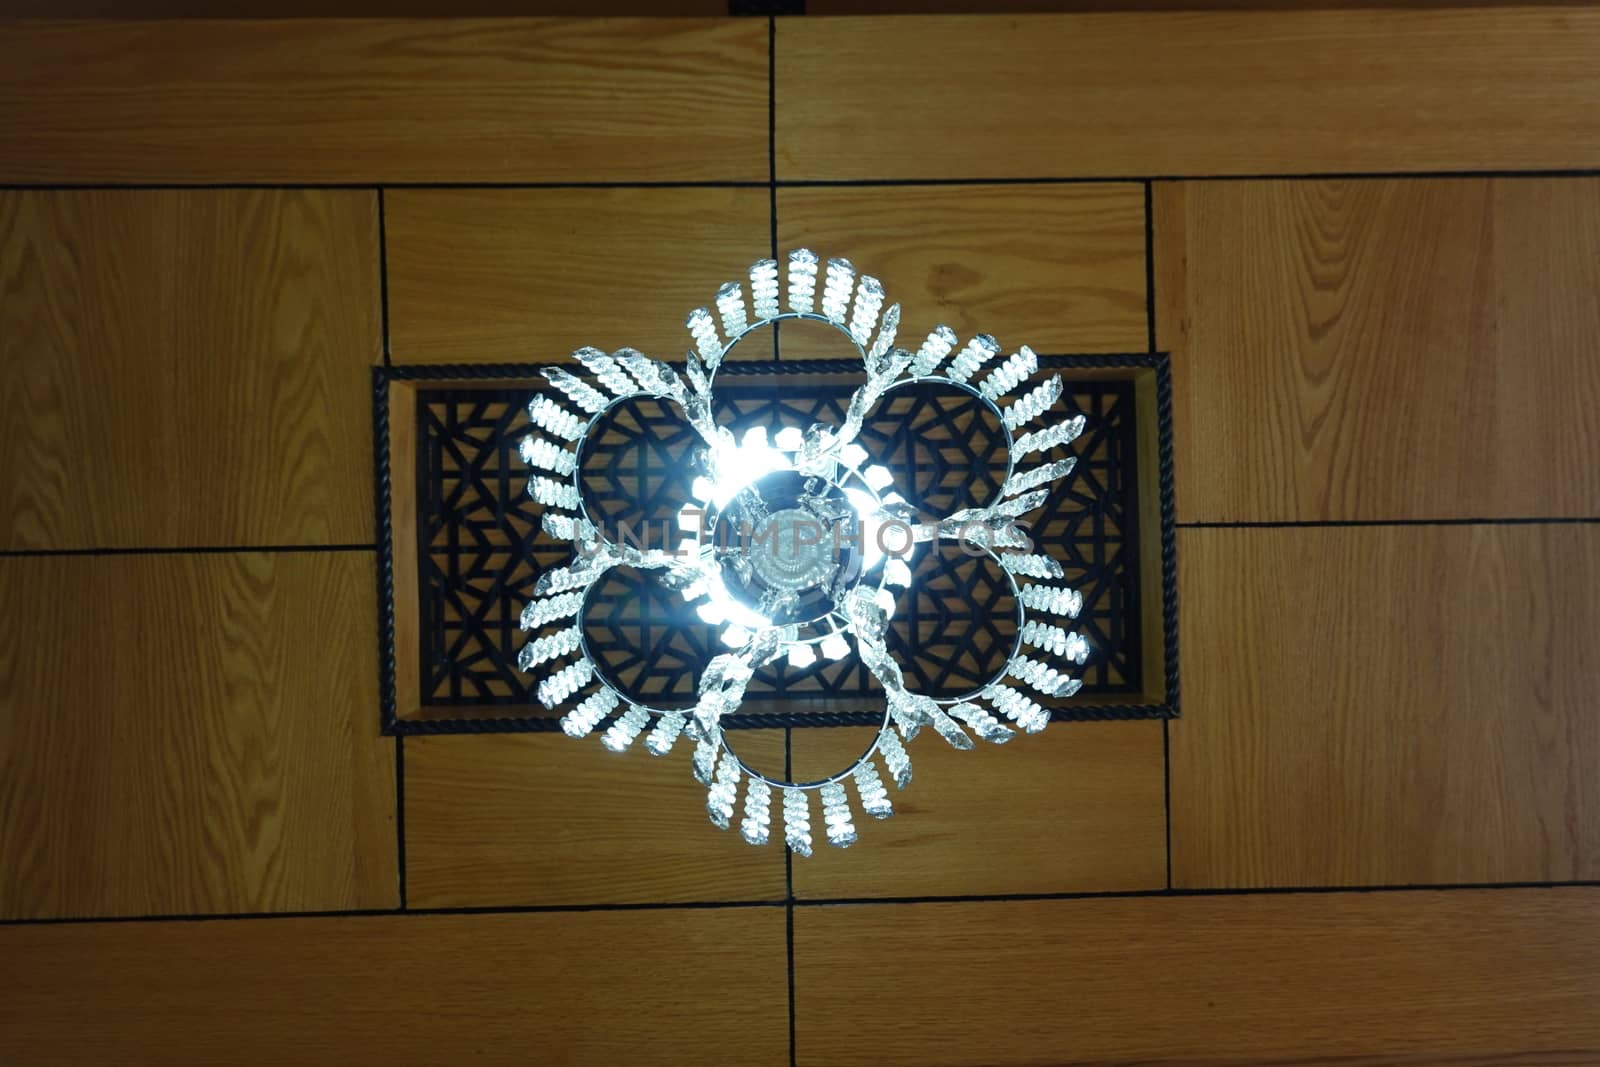 a beautiful cristal light decor on a wooden ceiling.